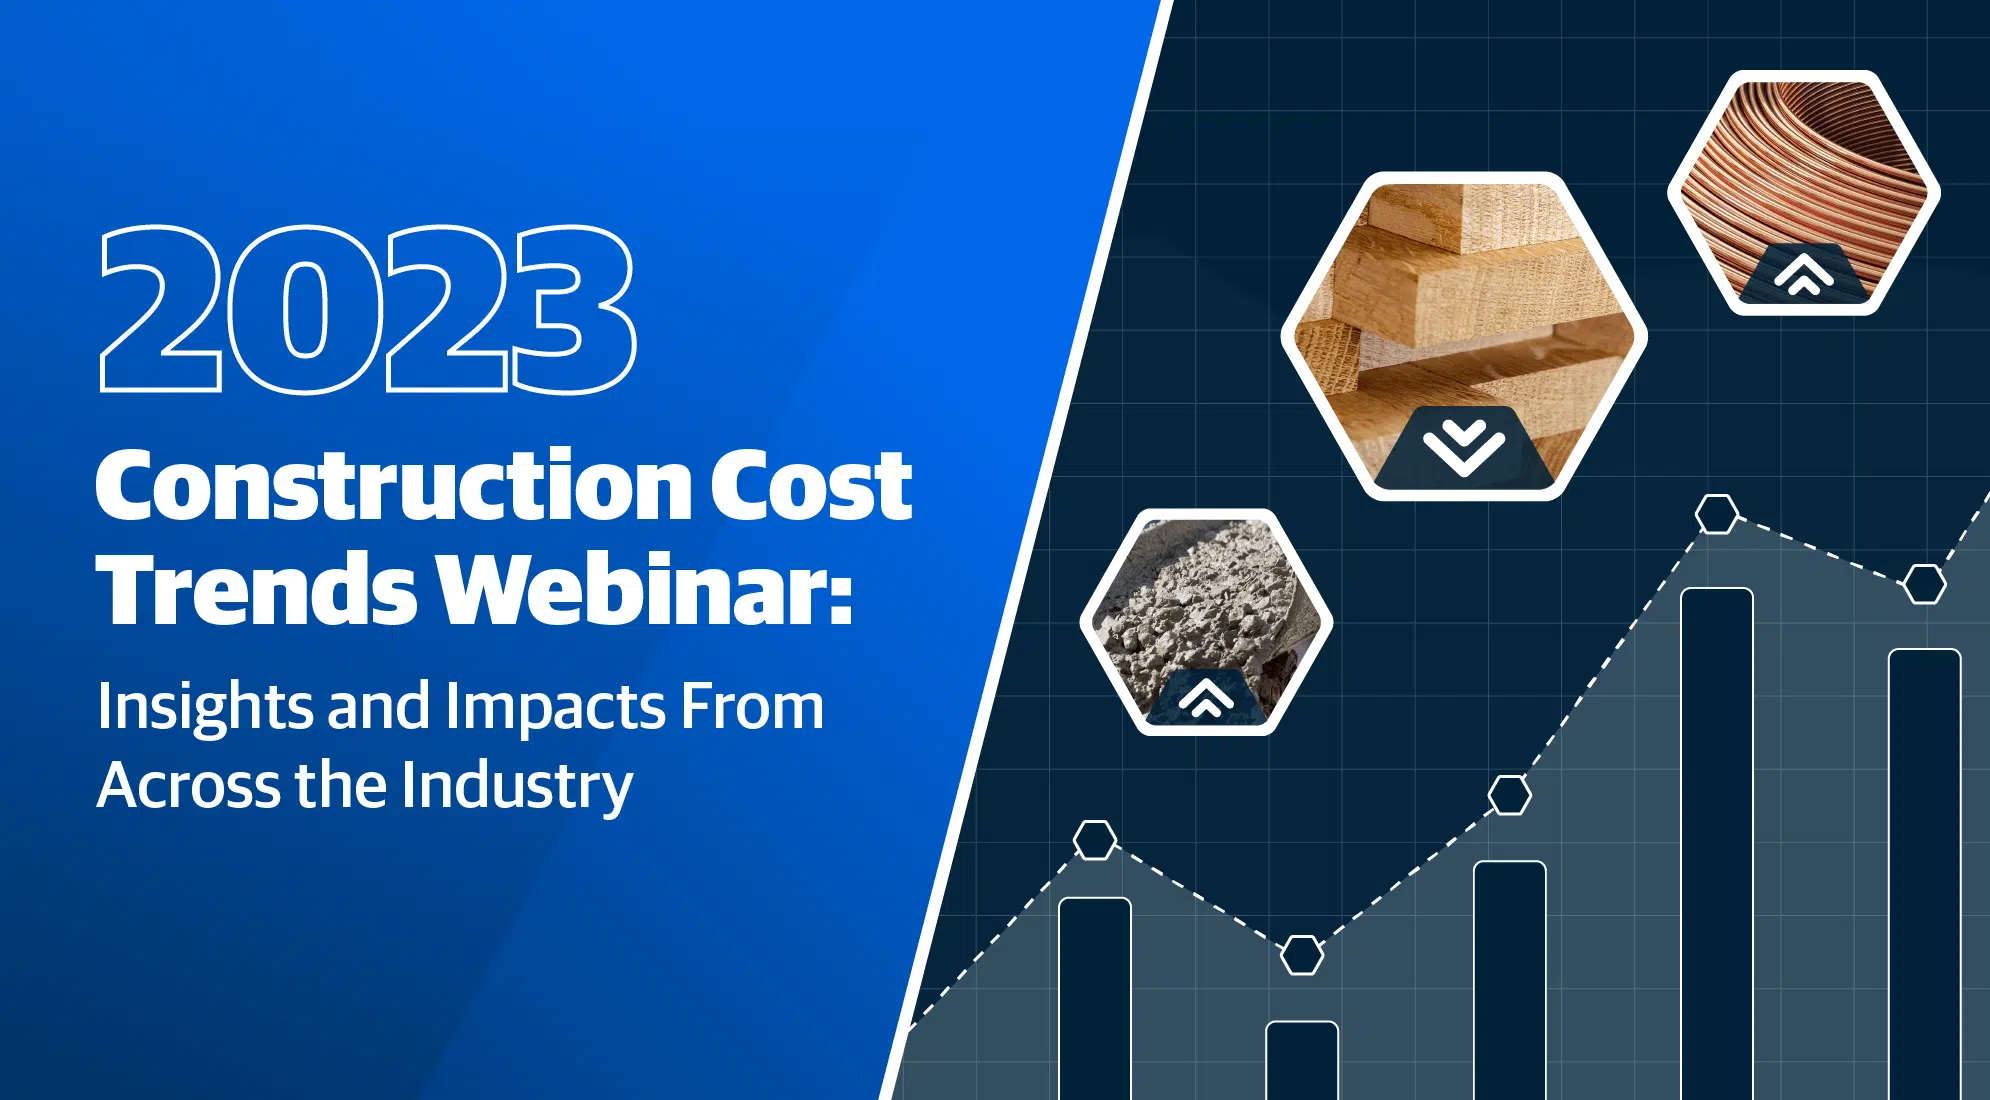 2023 Construction Cost Trends: Insights and Impacts from Across the Industry 2